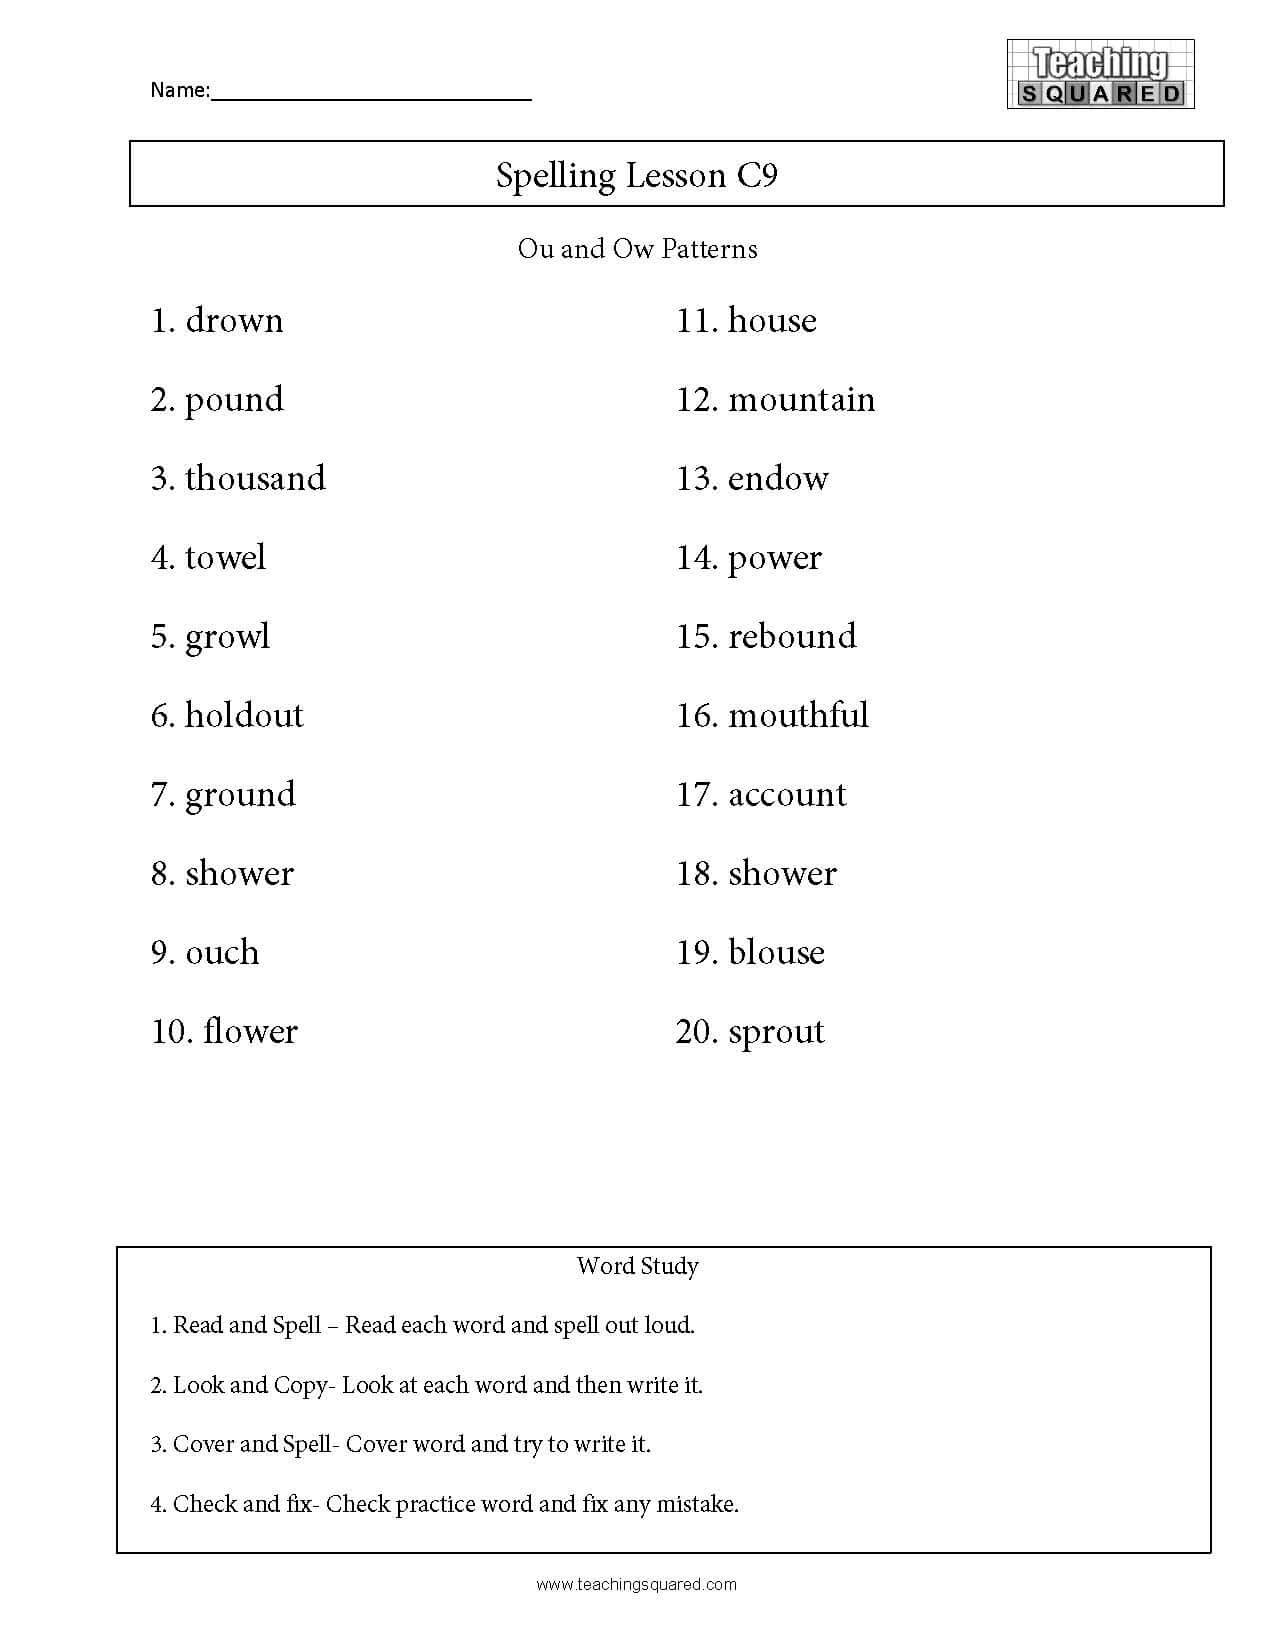 Ou Ow Worksheets 3rd Grade Spelling Lesson C9 Ou and Ow Patterns Teaching Squared